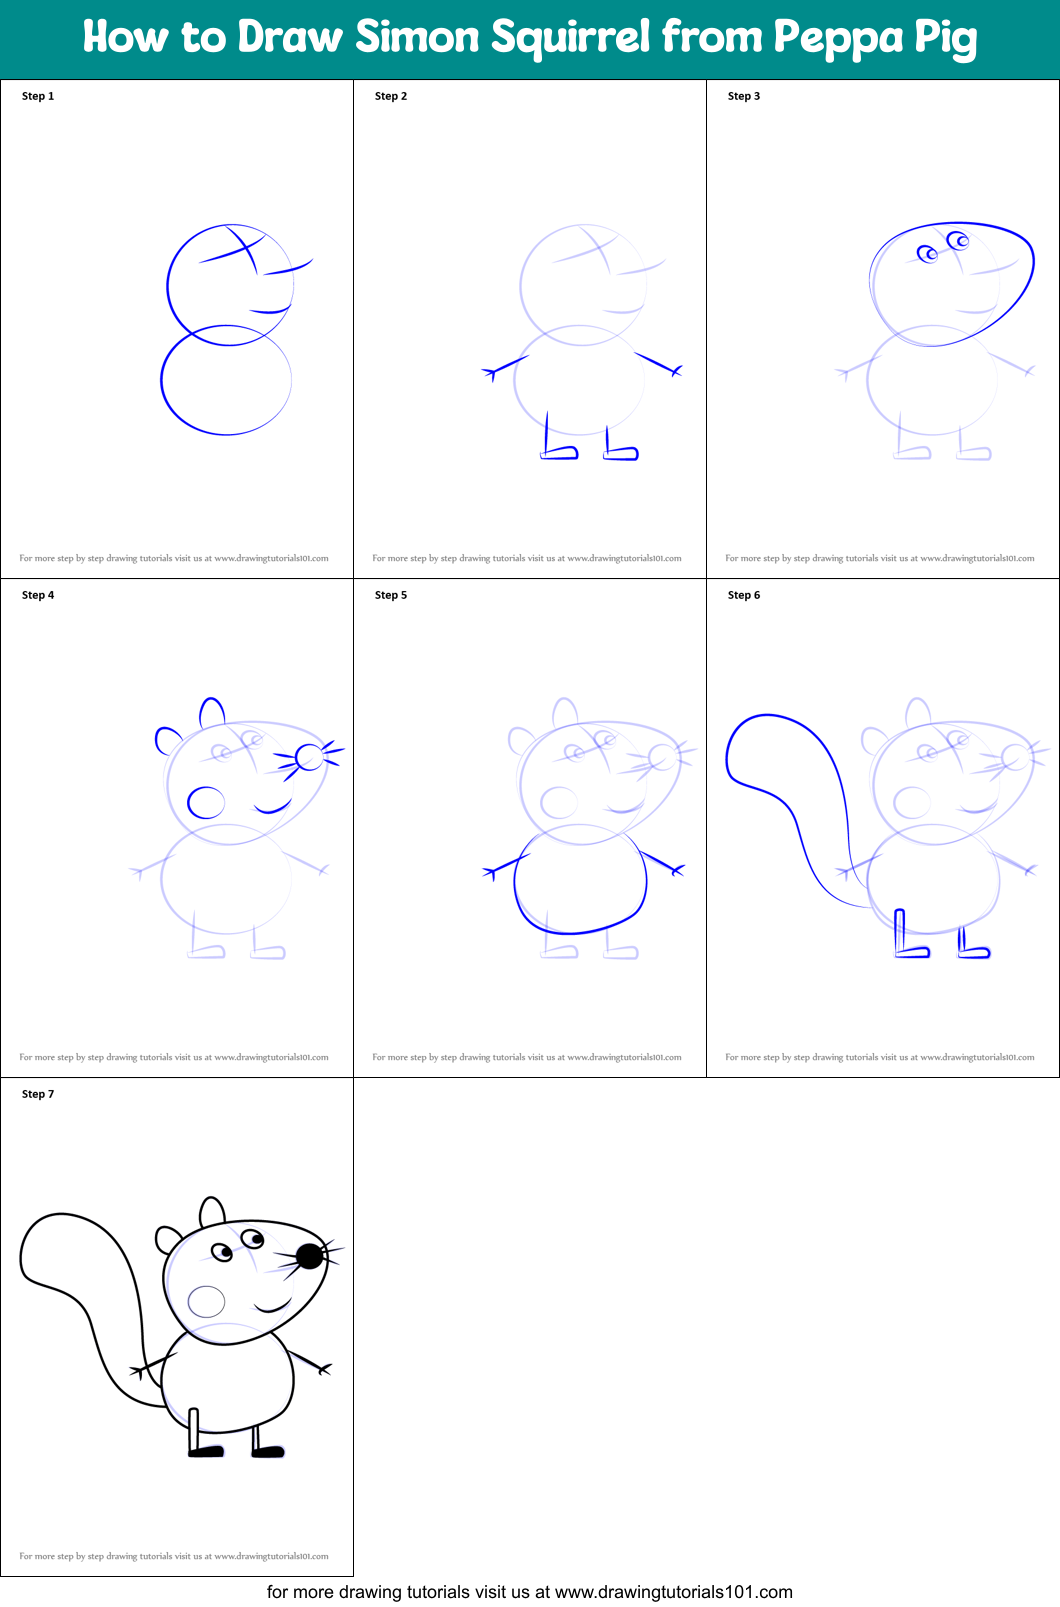 How to Draw Simon Squirrel from Peppa Pig printable step by step